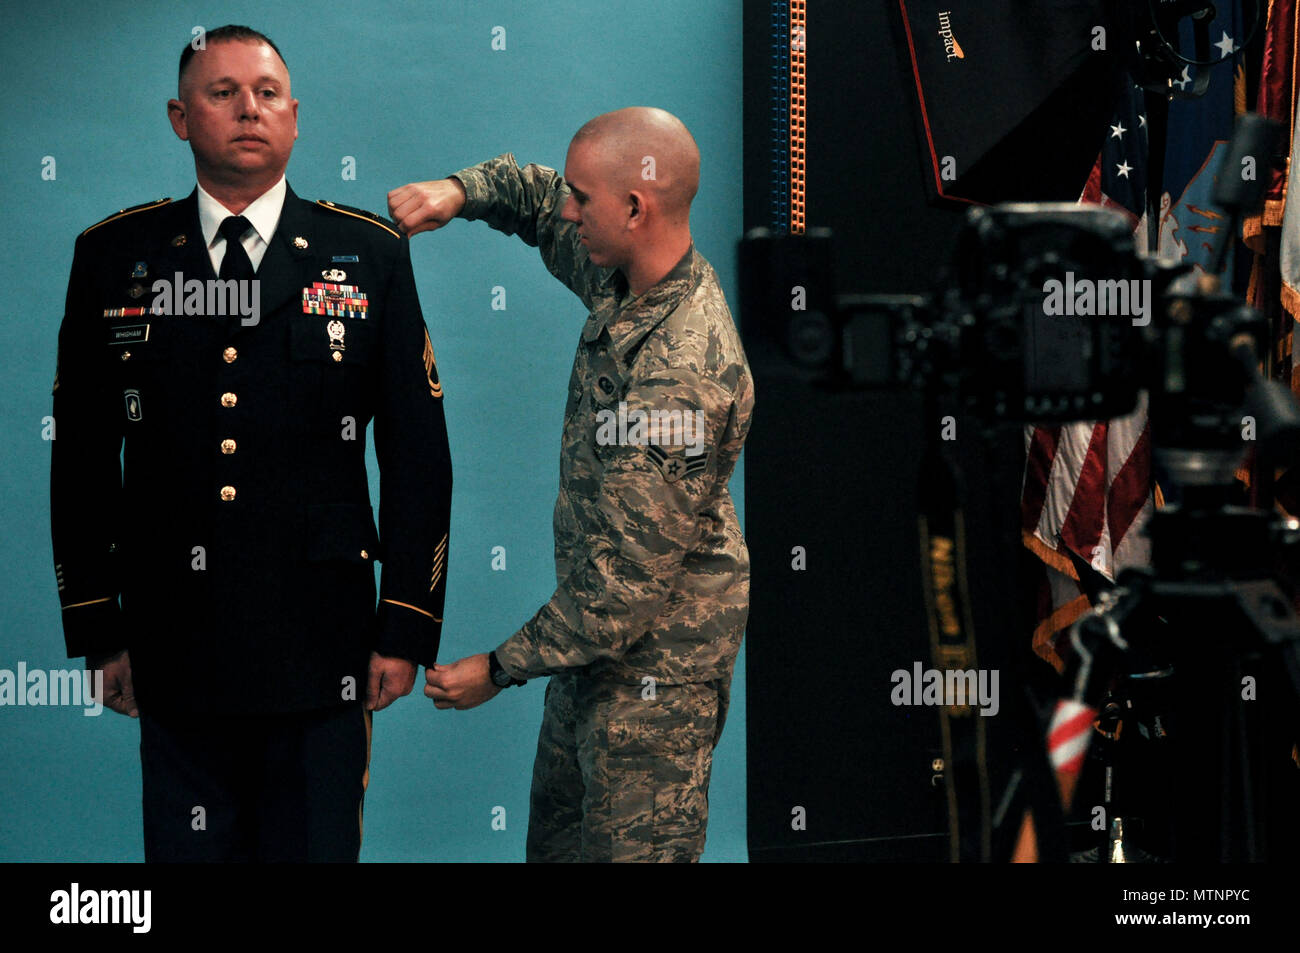 U.S. Air Force Airman 1st Class Randall Moose, 17th Training Wing Public  Affairs photojournalist, adjusts the uniform of U.S. Army Sgt. 1st Class  Corey Whigham, 344th military intelligence battalion, before taking an